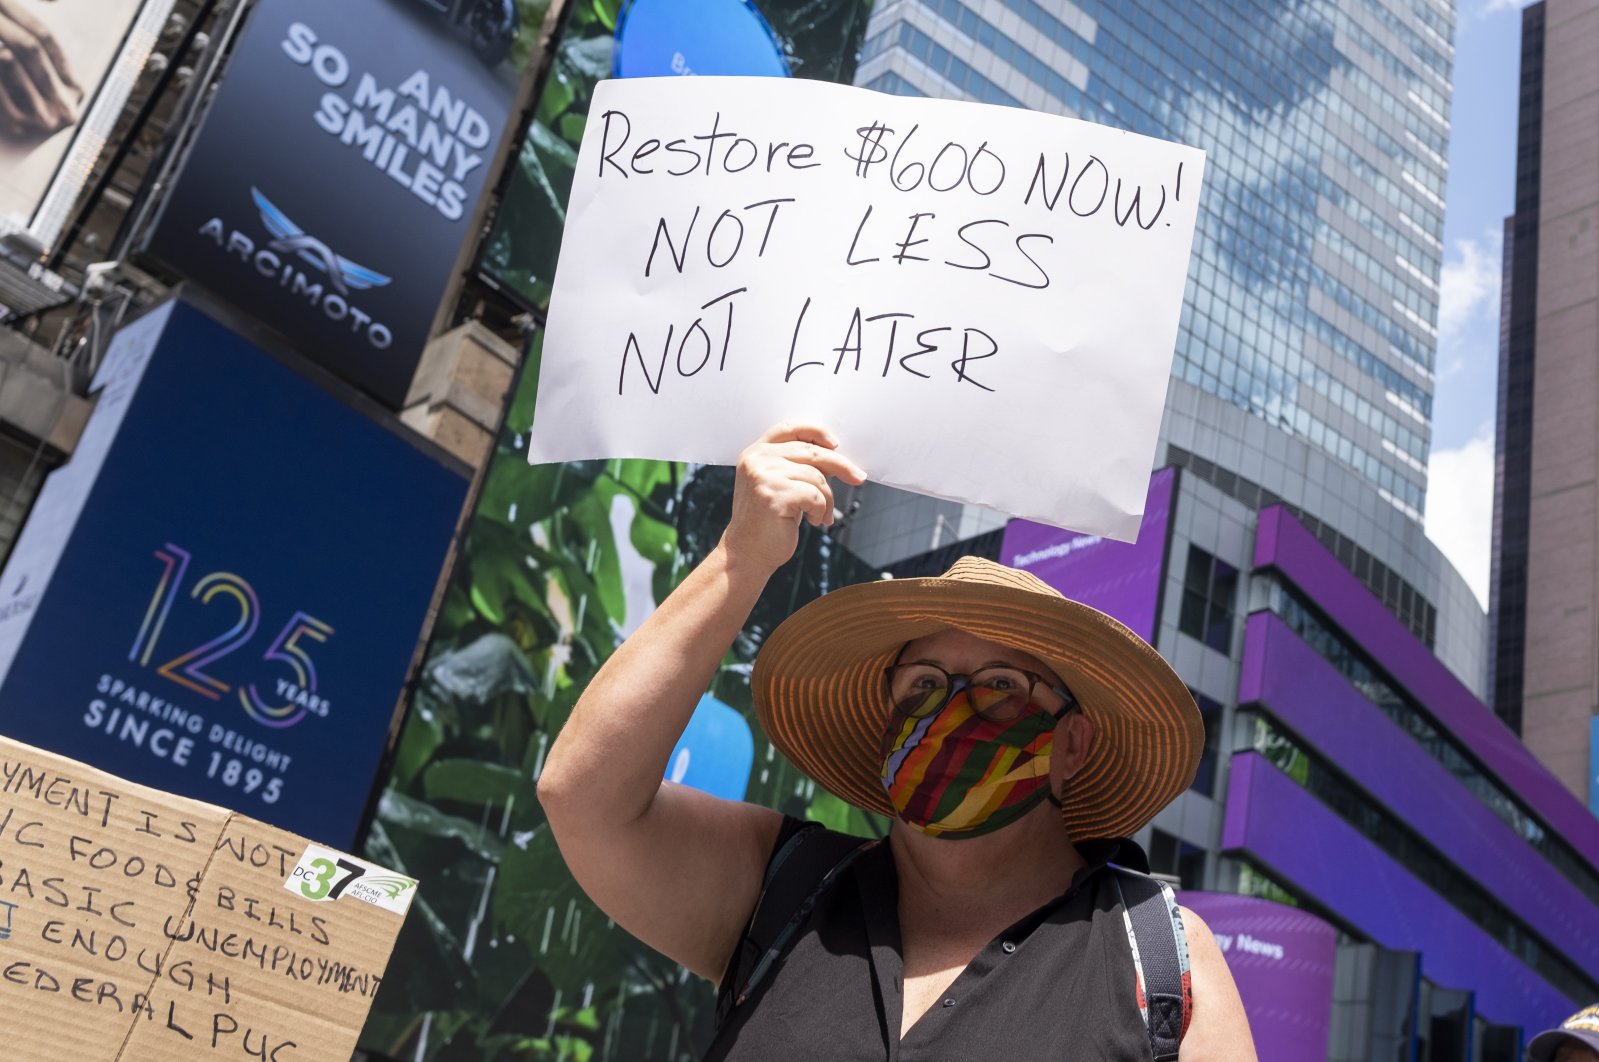 People gather for a rally calling on the U.S. Congress to pass new legislation extending now-expired unemployment benefits to people that are being economically affected by the coronavirus pandemic, in New York, Aug. 5, 2020. (EPA Photo)